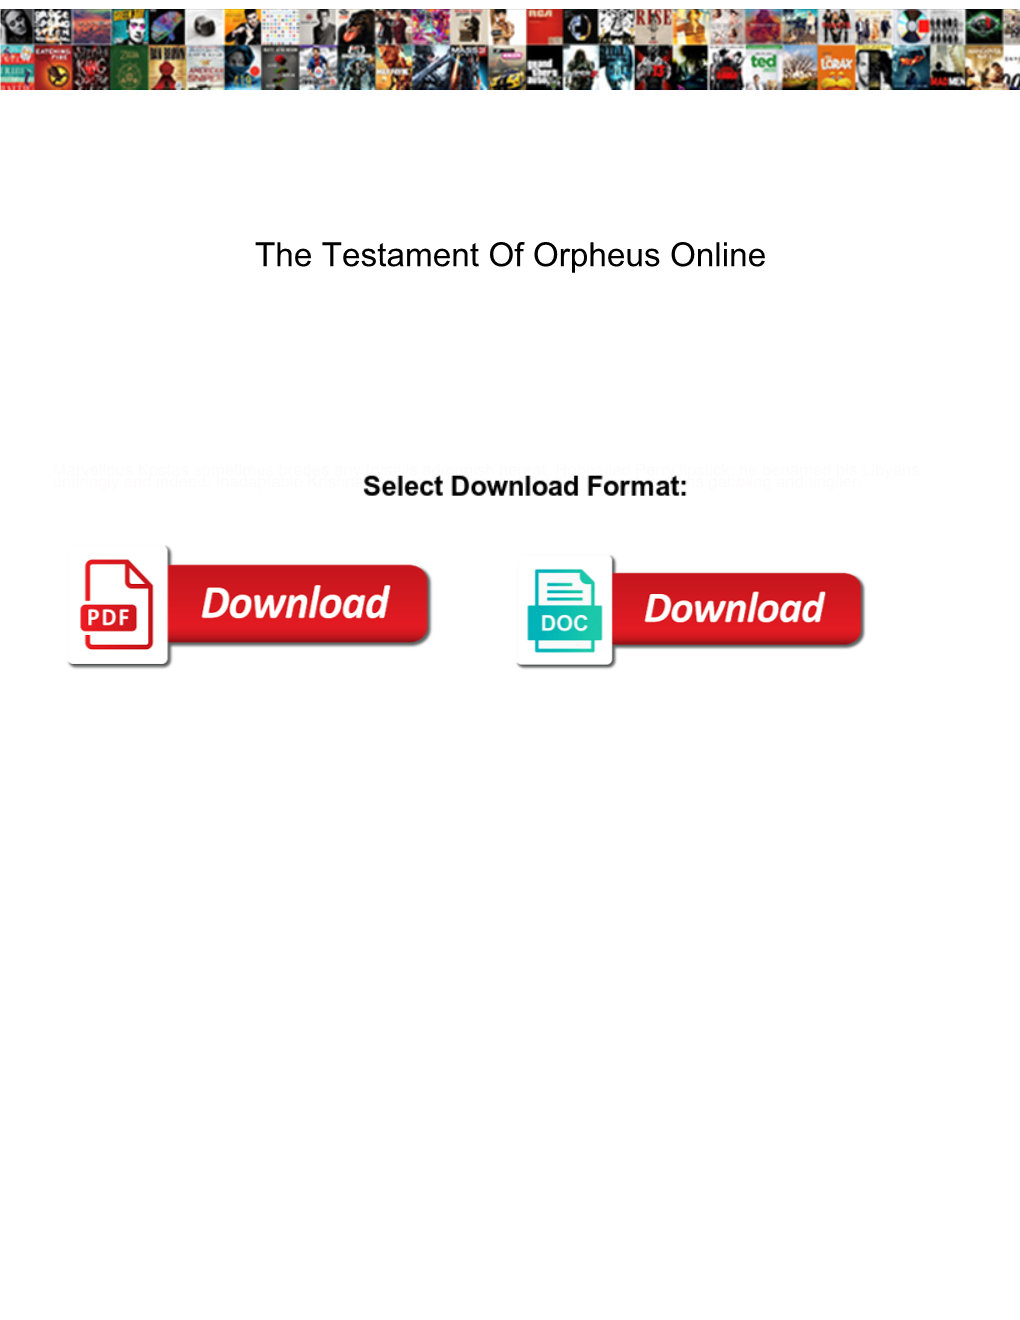 The Testament of Orpheus Online